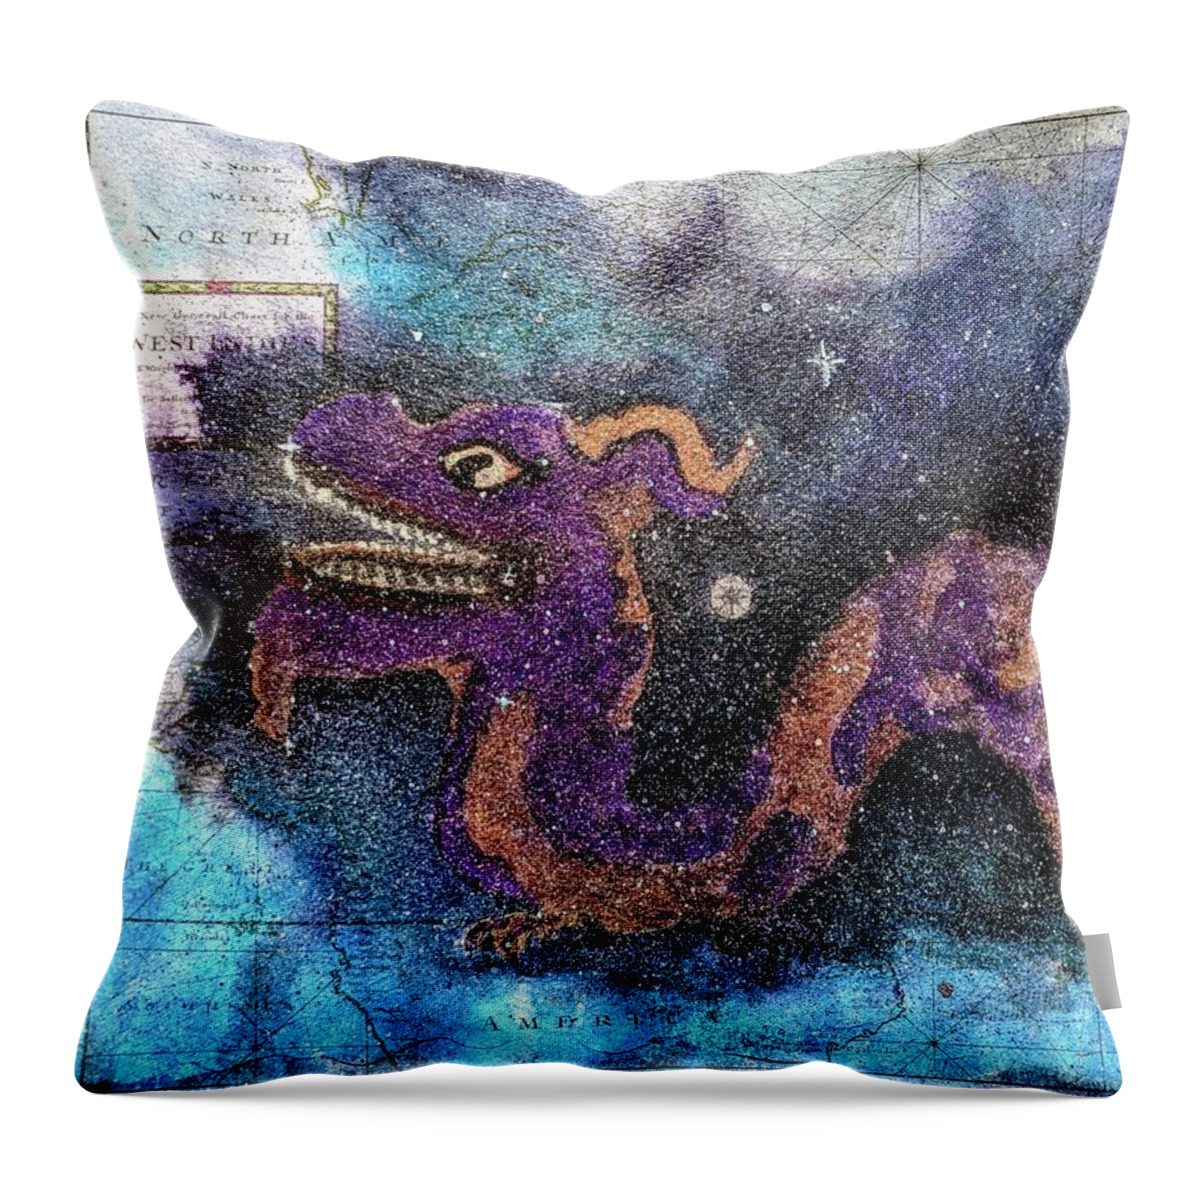 Dragon Throw Pillow featuring the painting In the Night Sky by Misty Morehead